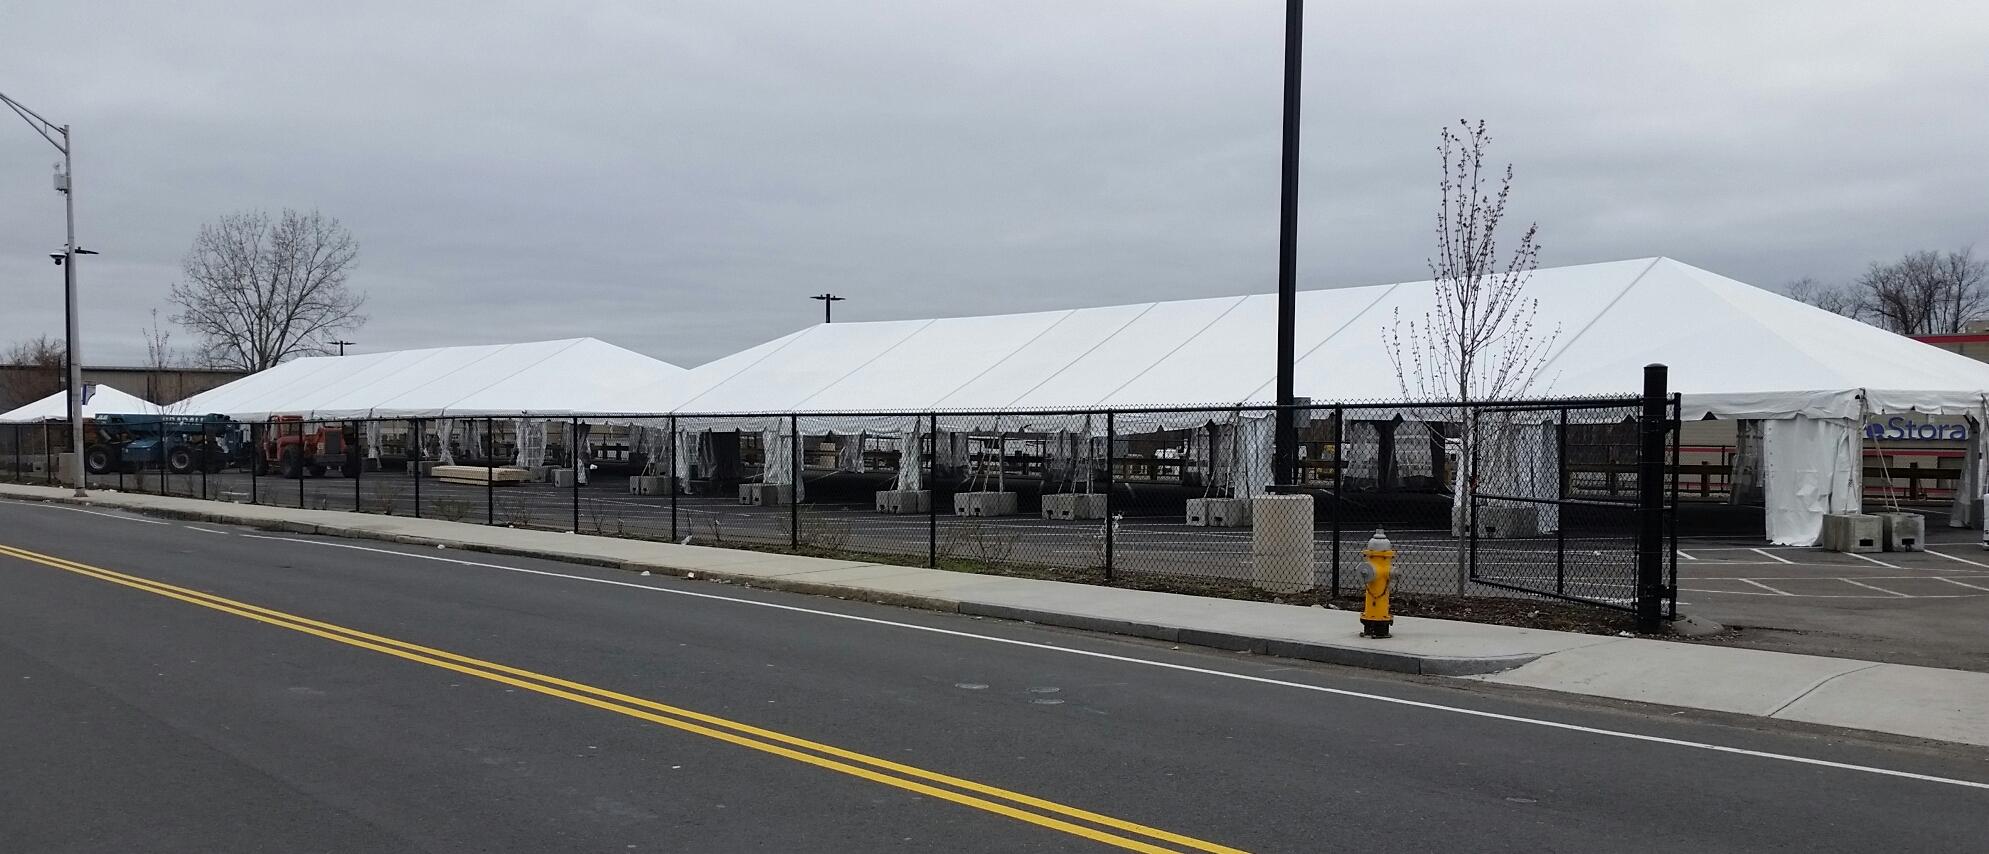 These tents in a parking lot across the street from the Friends Of the Homeless shelter in Springfield, MA will be used to test, quarantine, and treat homeless people during the pandemic.